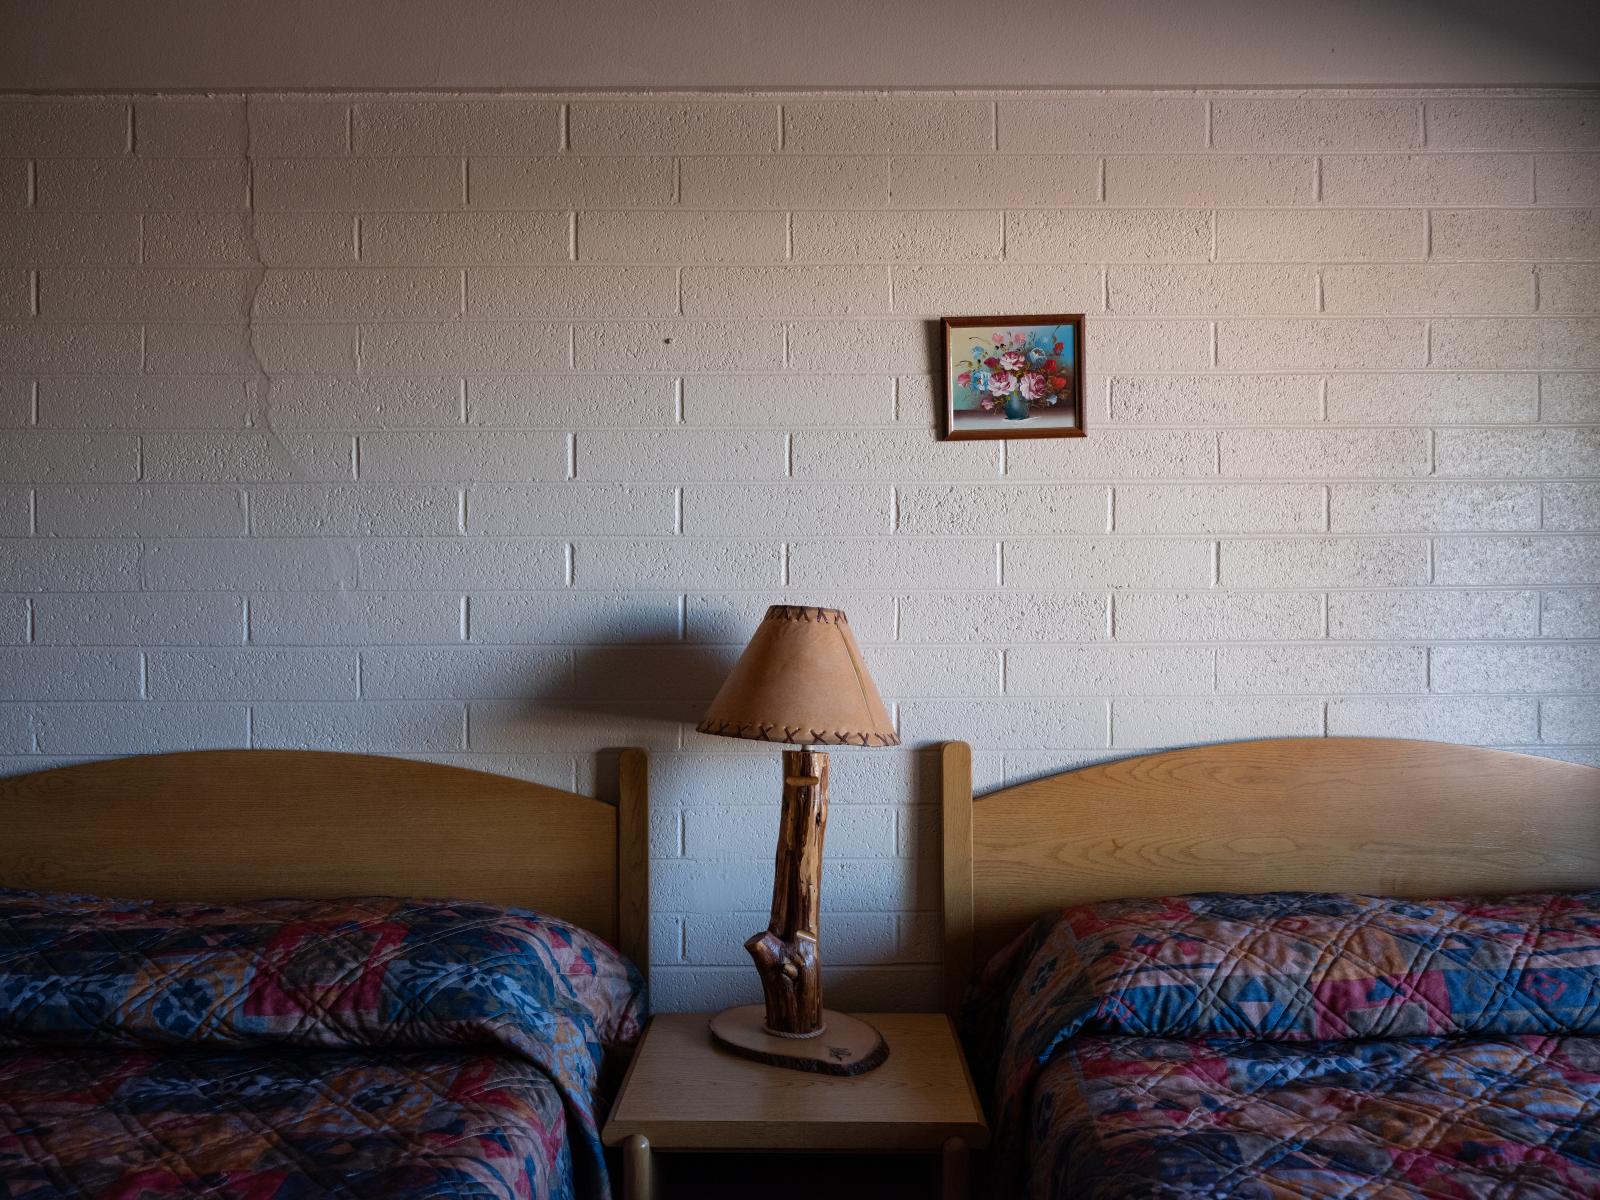 Motel Room | Buy this image